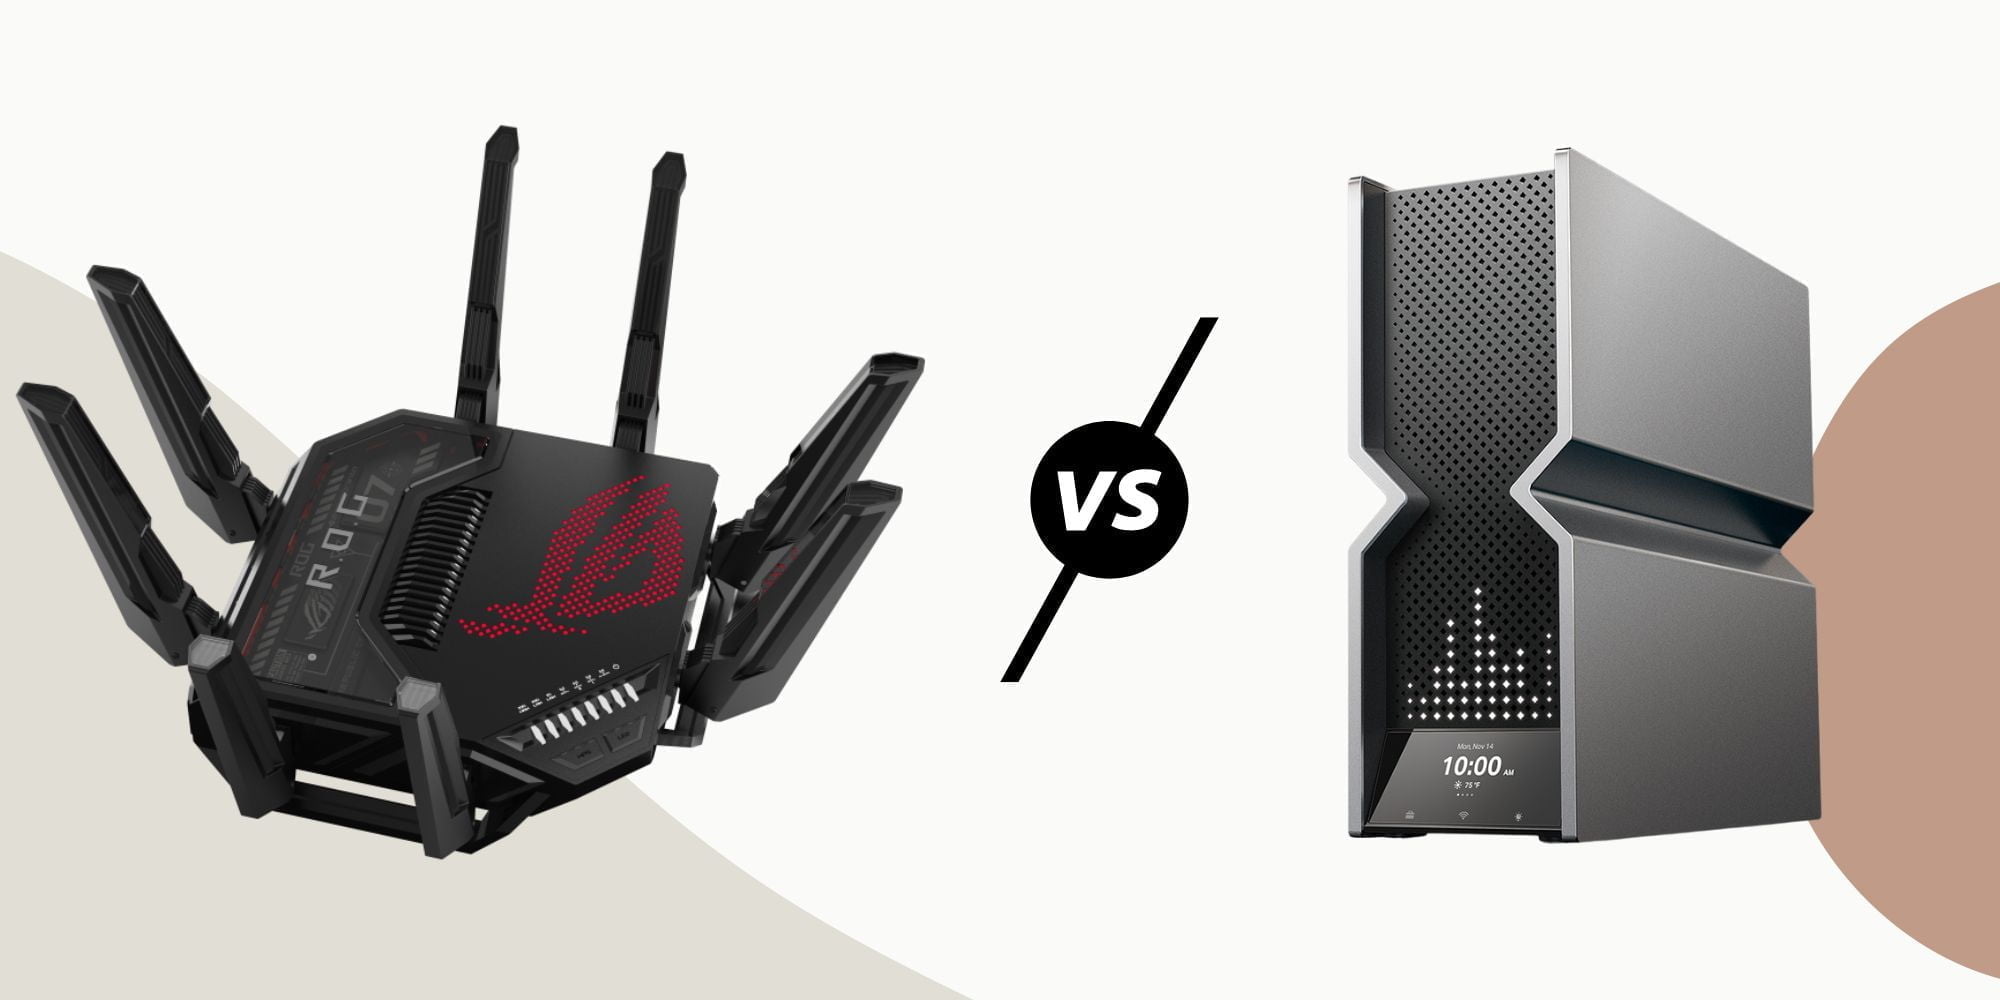 Asus GT-BE98 vs TP-Link Archer BE900 Quad-band Wi-Fi 7 Routers Compared